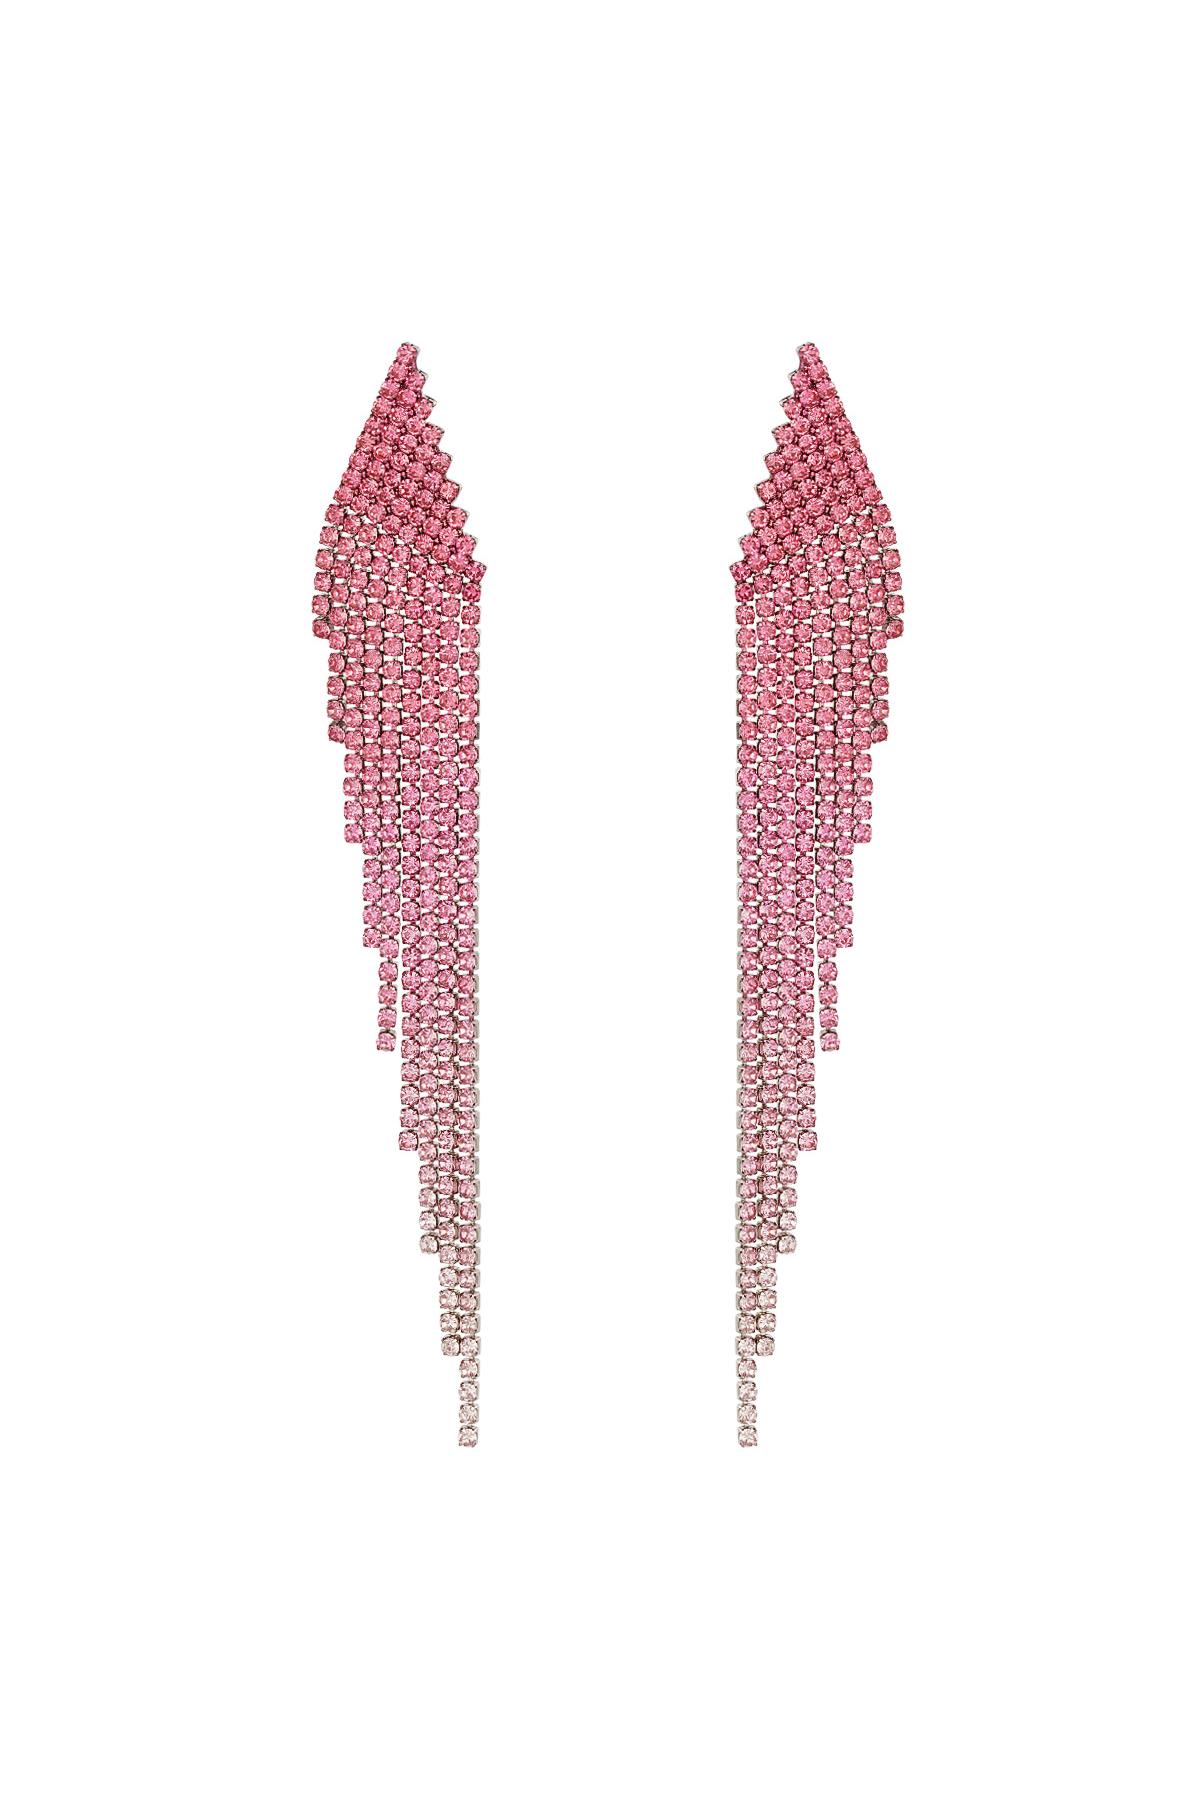 Strass-Ohrringe ombre - Holiday Essentials Rosè &amp; Silber Kupfer